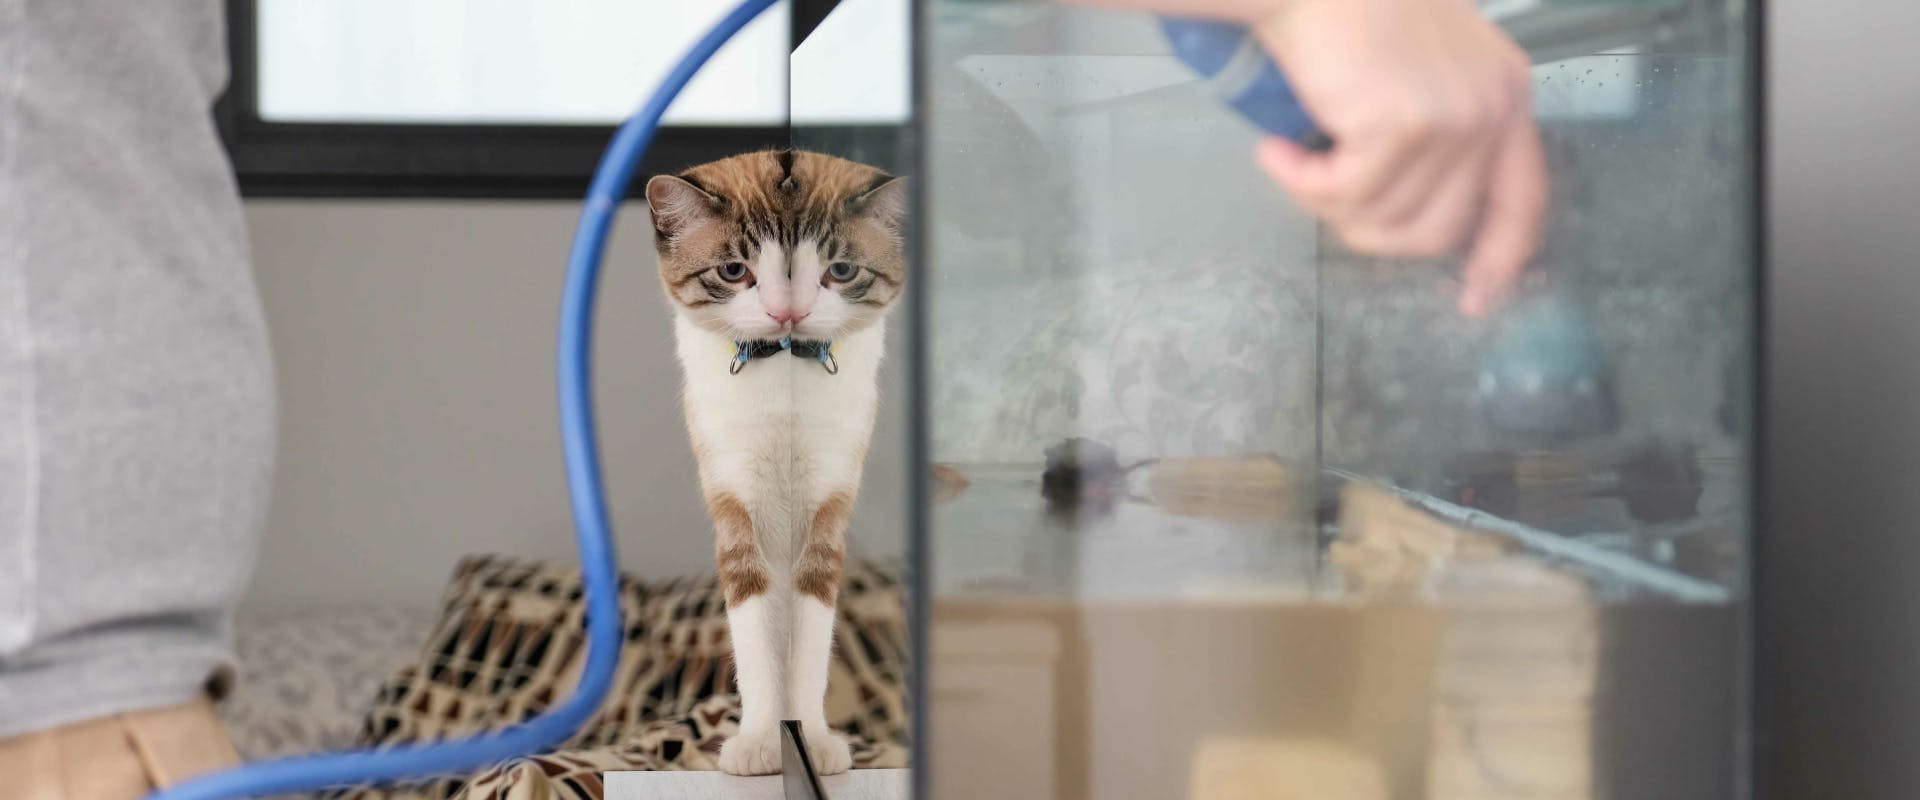 a cat watching a human fill up a fish tank with water from a blue hose